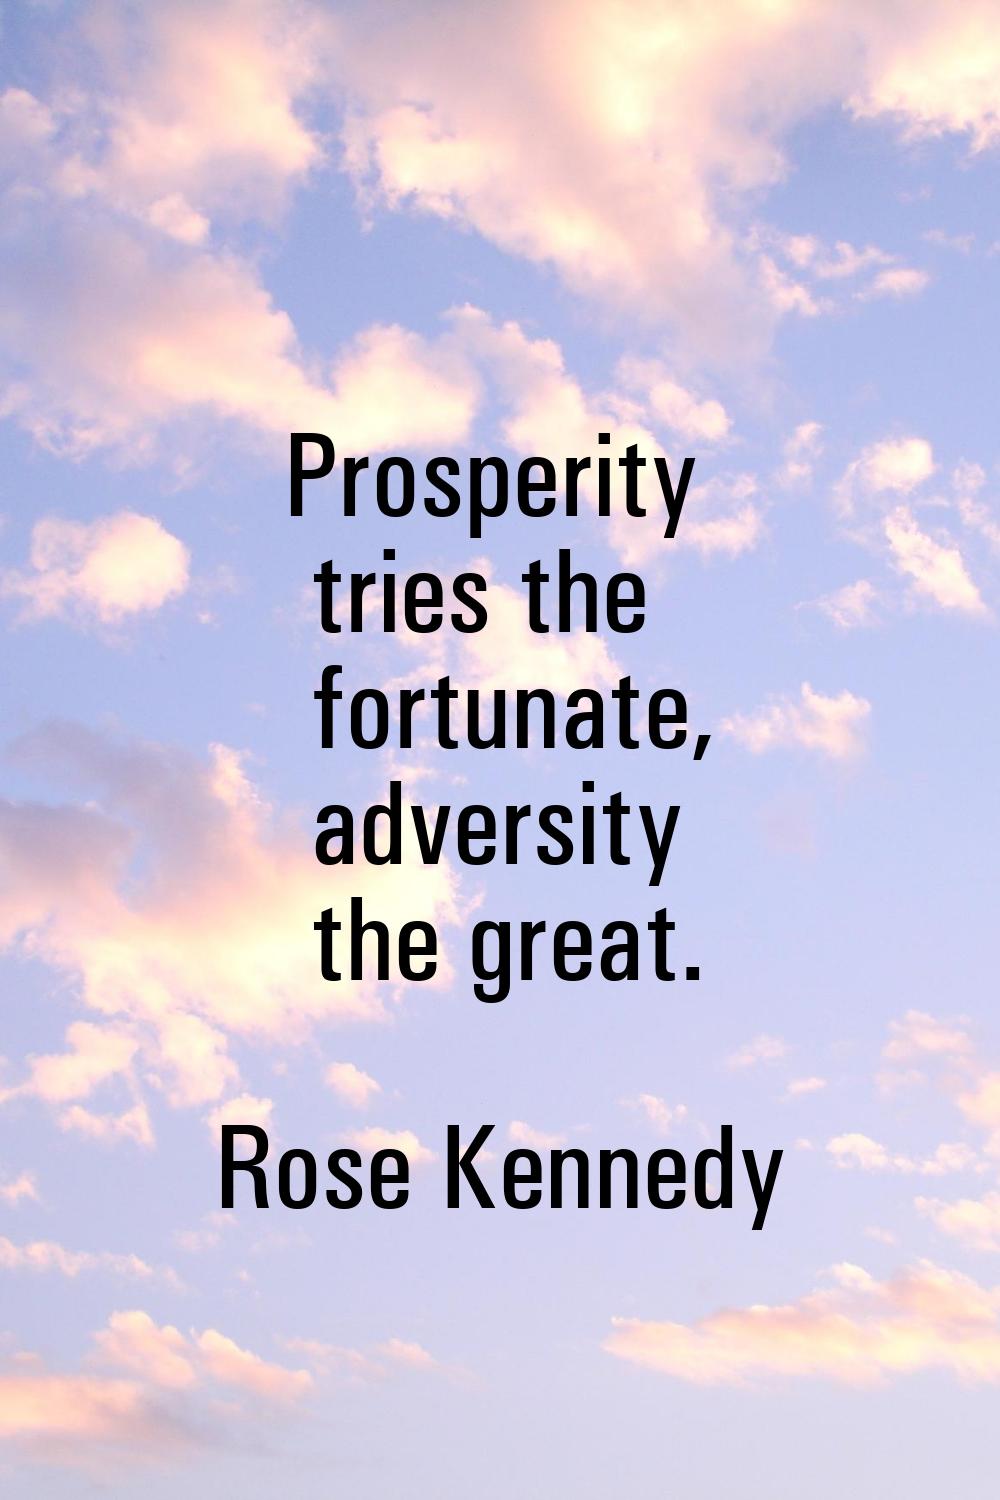 Prosperity tries the fortunate, adversity the great.